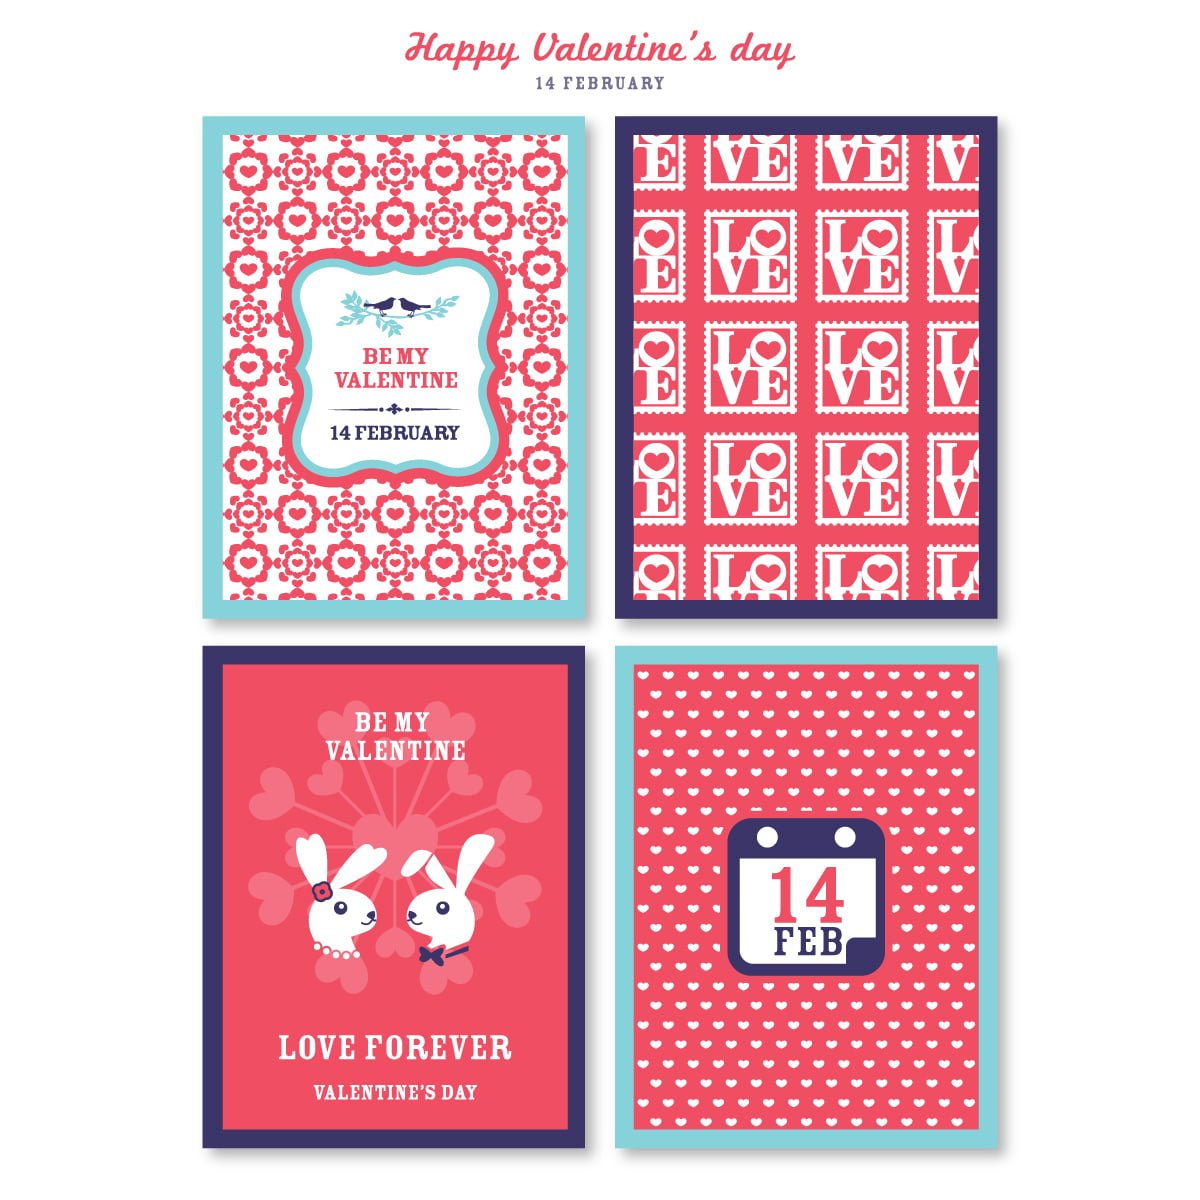 4 love cards for valentine